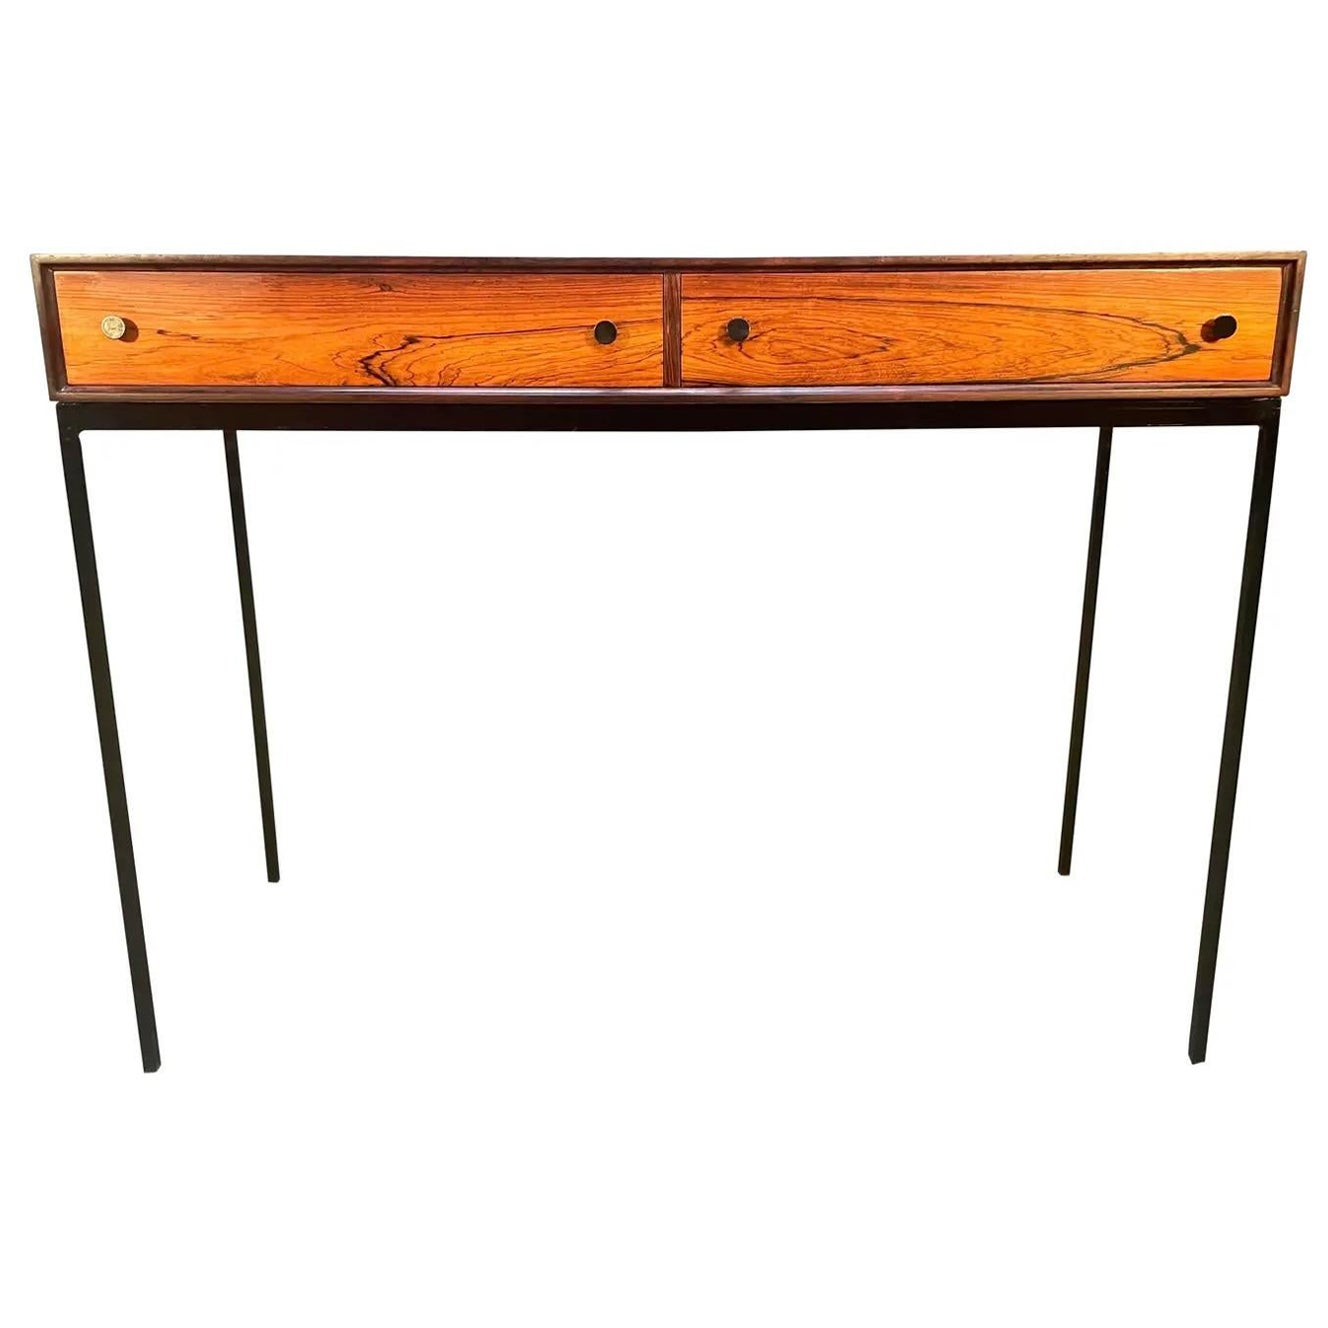 Vintage Danish Mid-Century Modern Rosewood Entry Way Console by Poul Norreklit